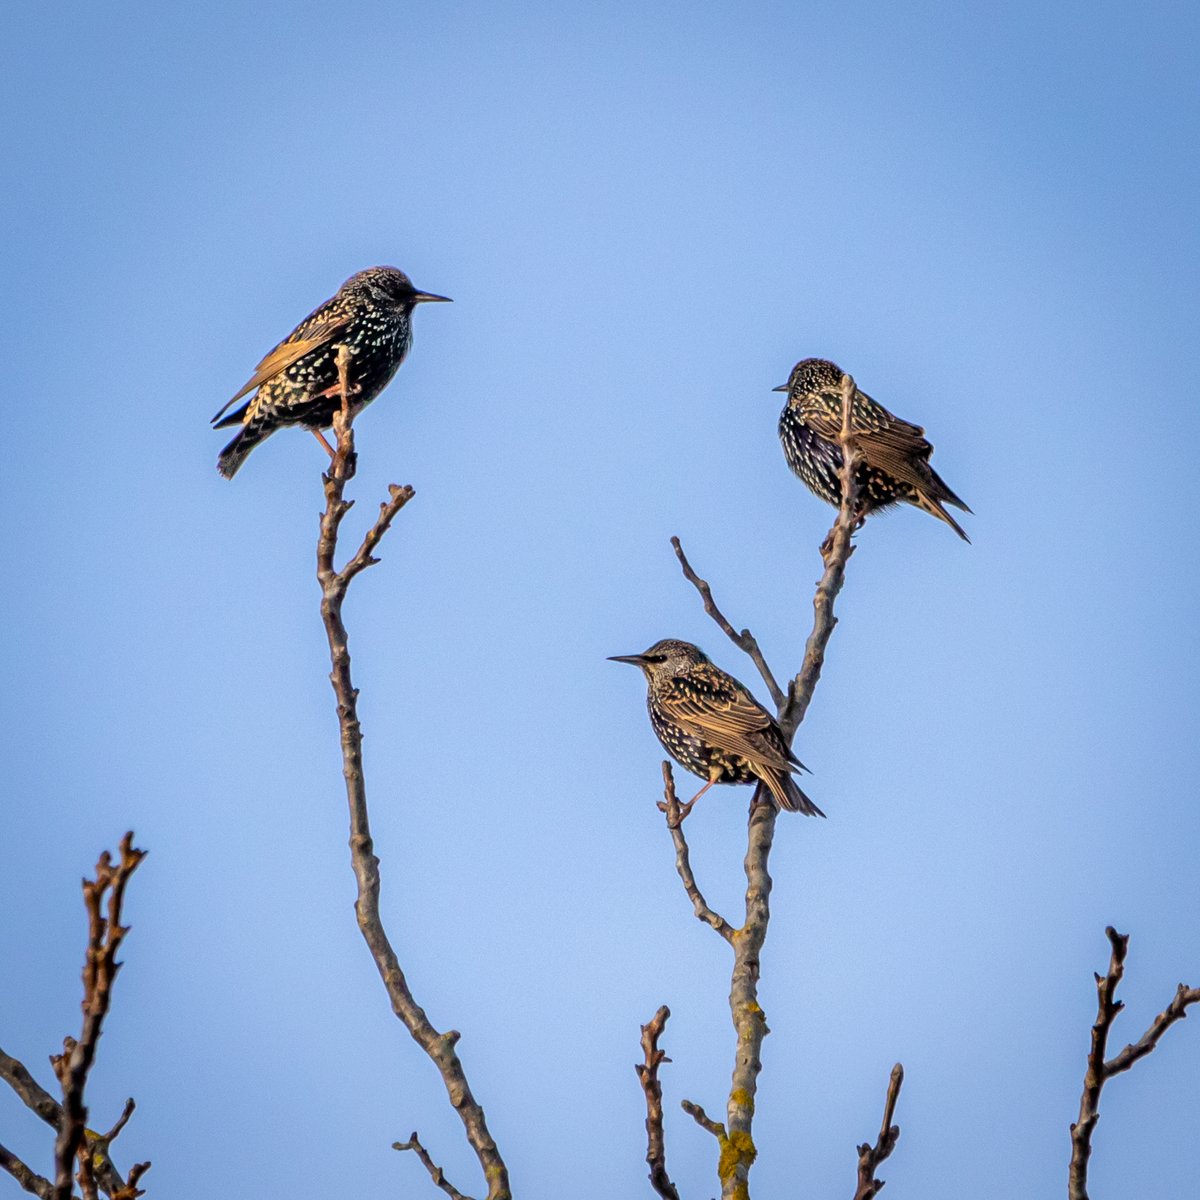 Good morning all. Three Starlings catching the last of the evening sun. Wishing everyone a happy and safe Friday. #TwitterNatureCommunity #nature #birds #TwitterNaturePhotography #naturelovers #NaturePhotography andyjennerphotography.com